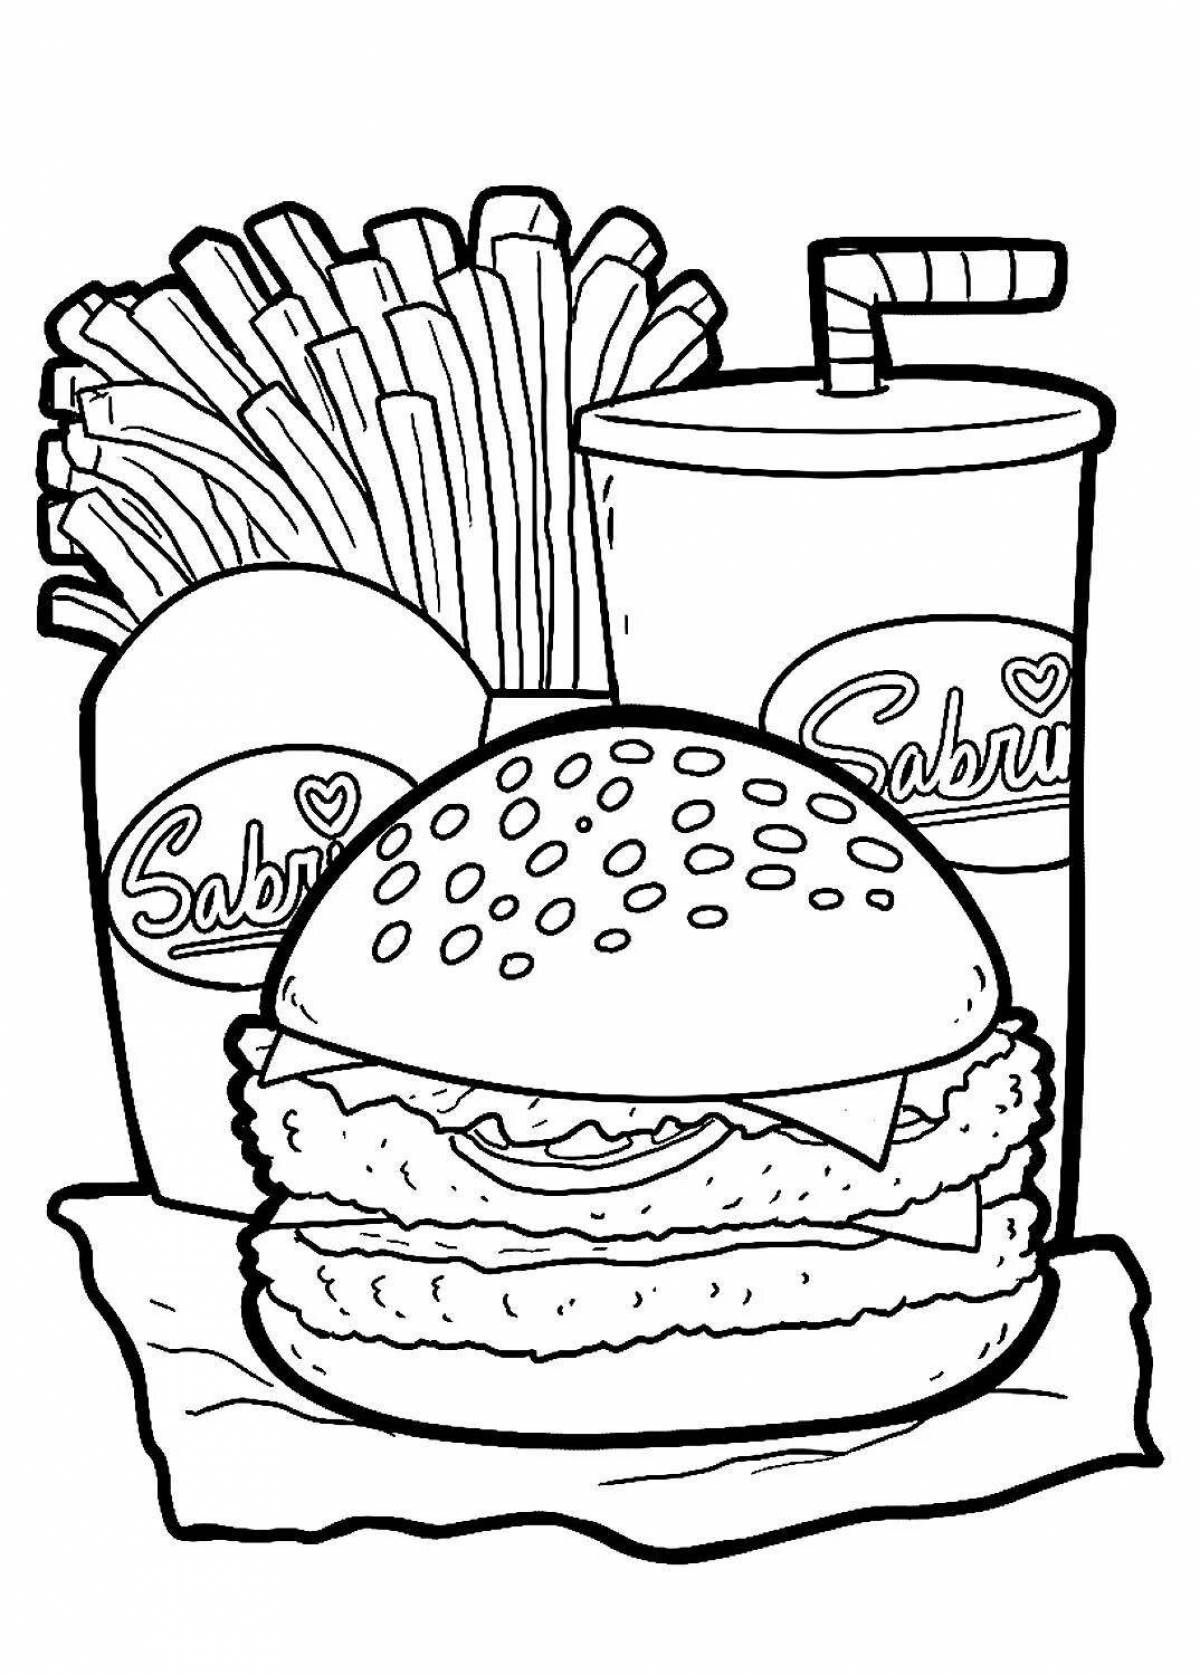 Amazing mcdonald's food coloring page